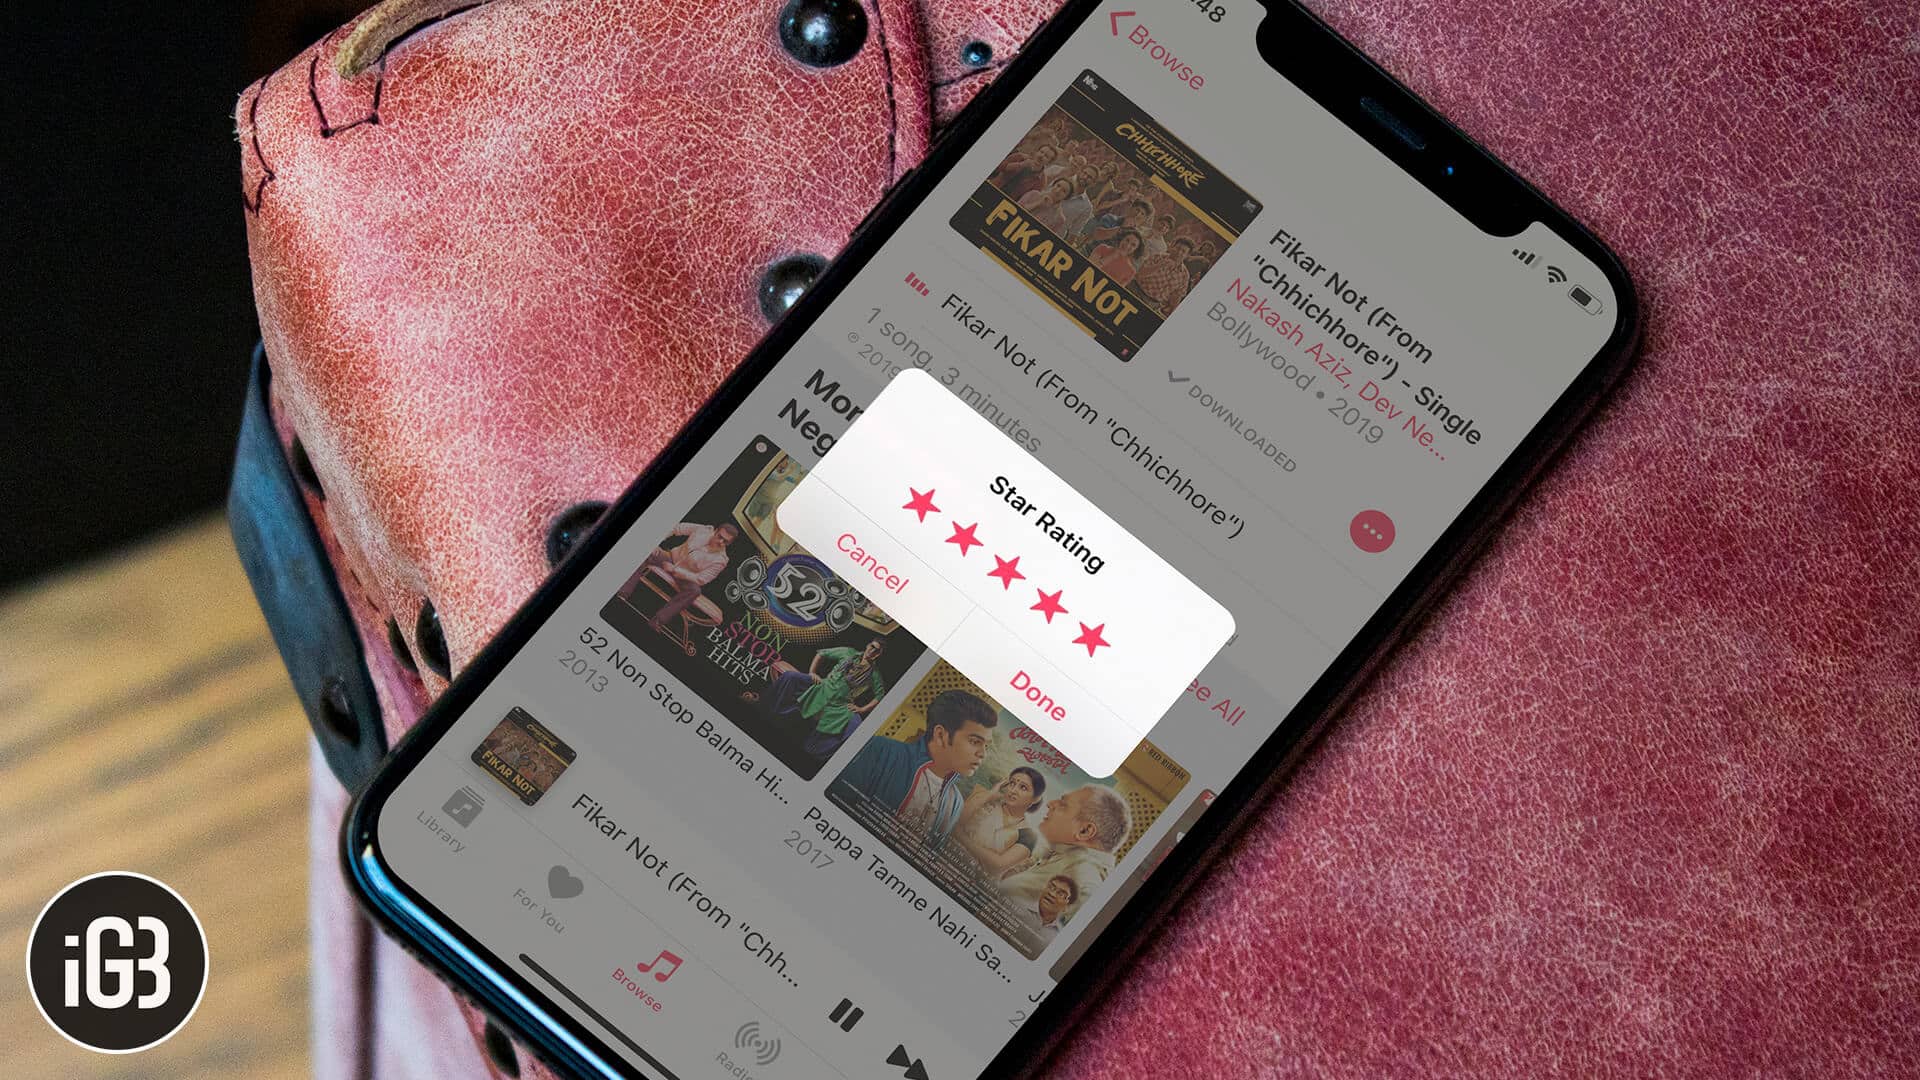 How to add star ratings to songs in apple music on iphone ipad apple watch mac and itunes